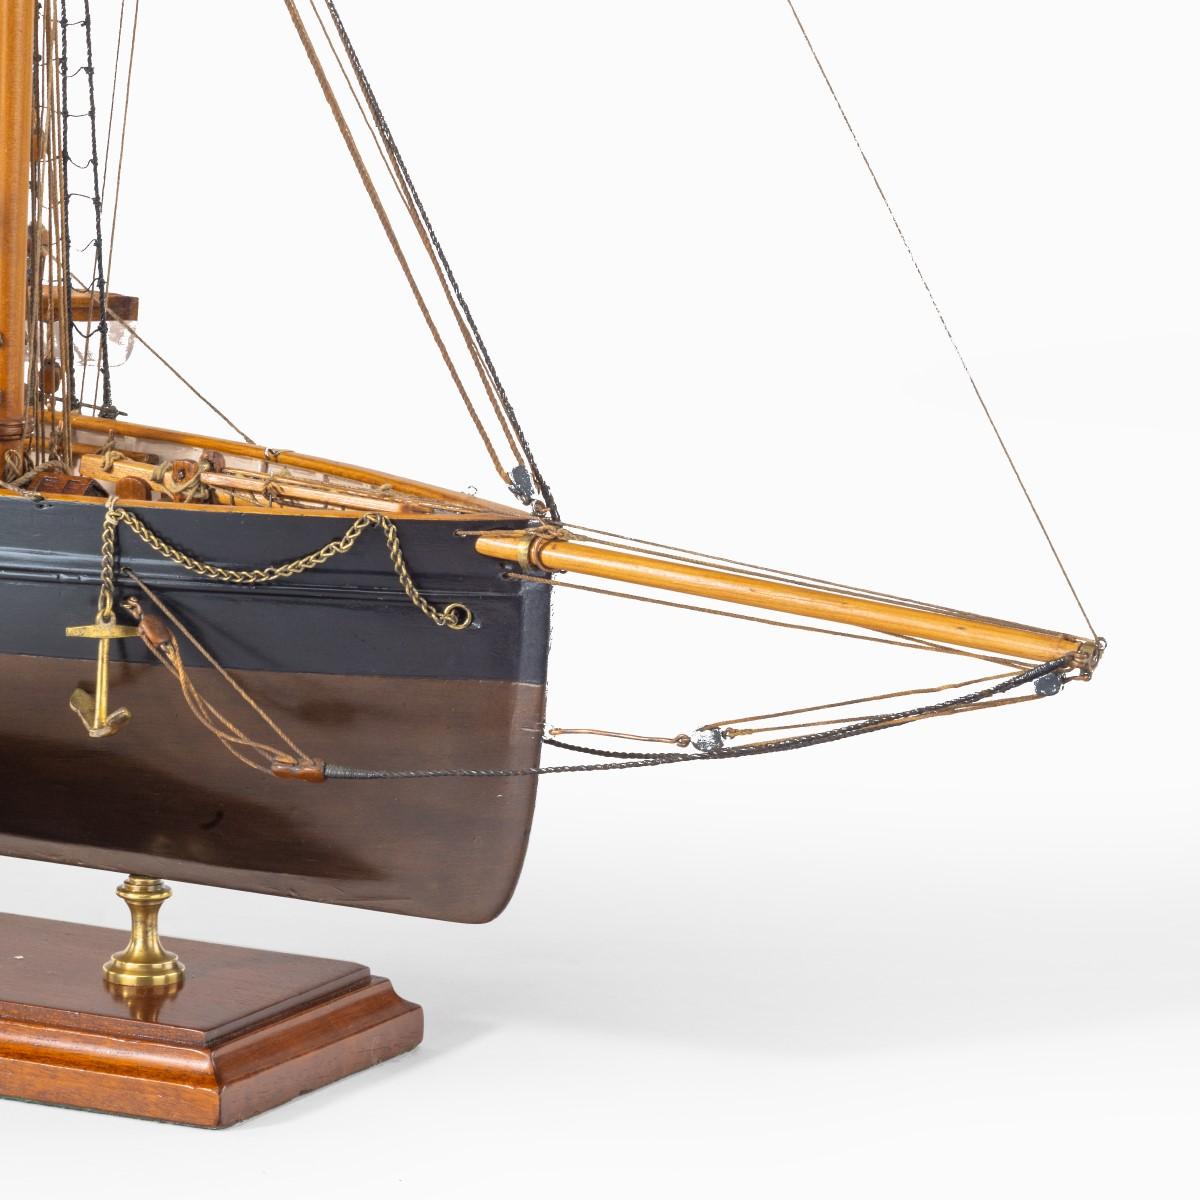 Shipyard Model of a Gaff-Rigged Newhaven Smack 8